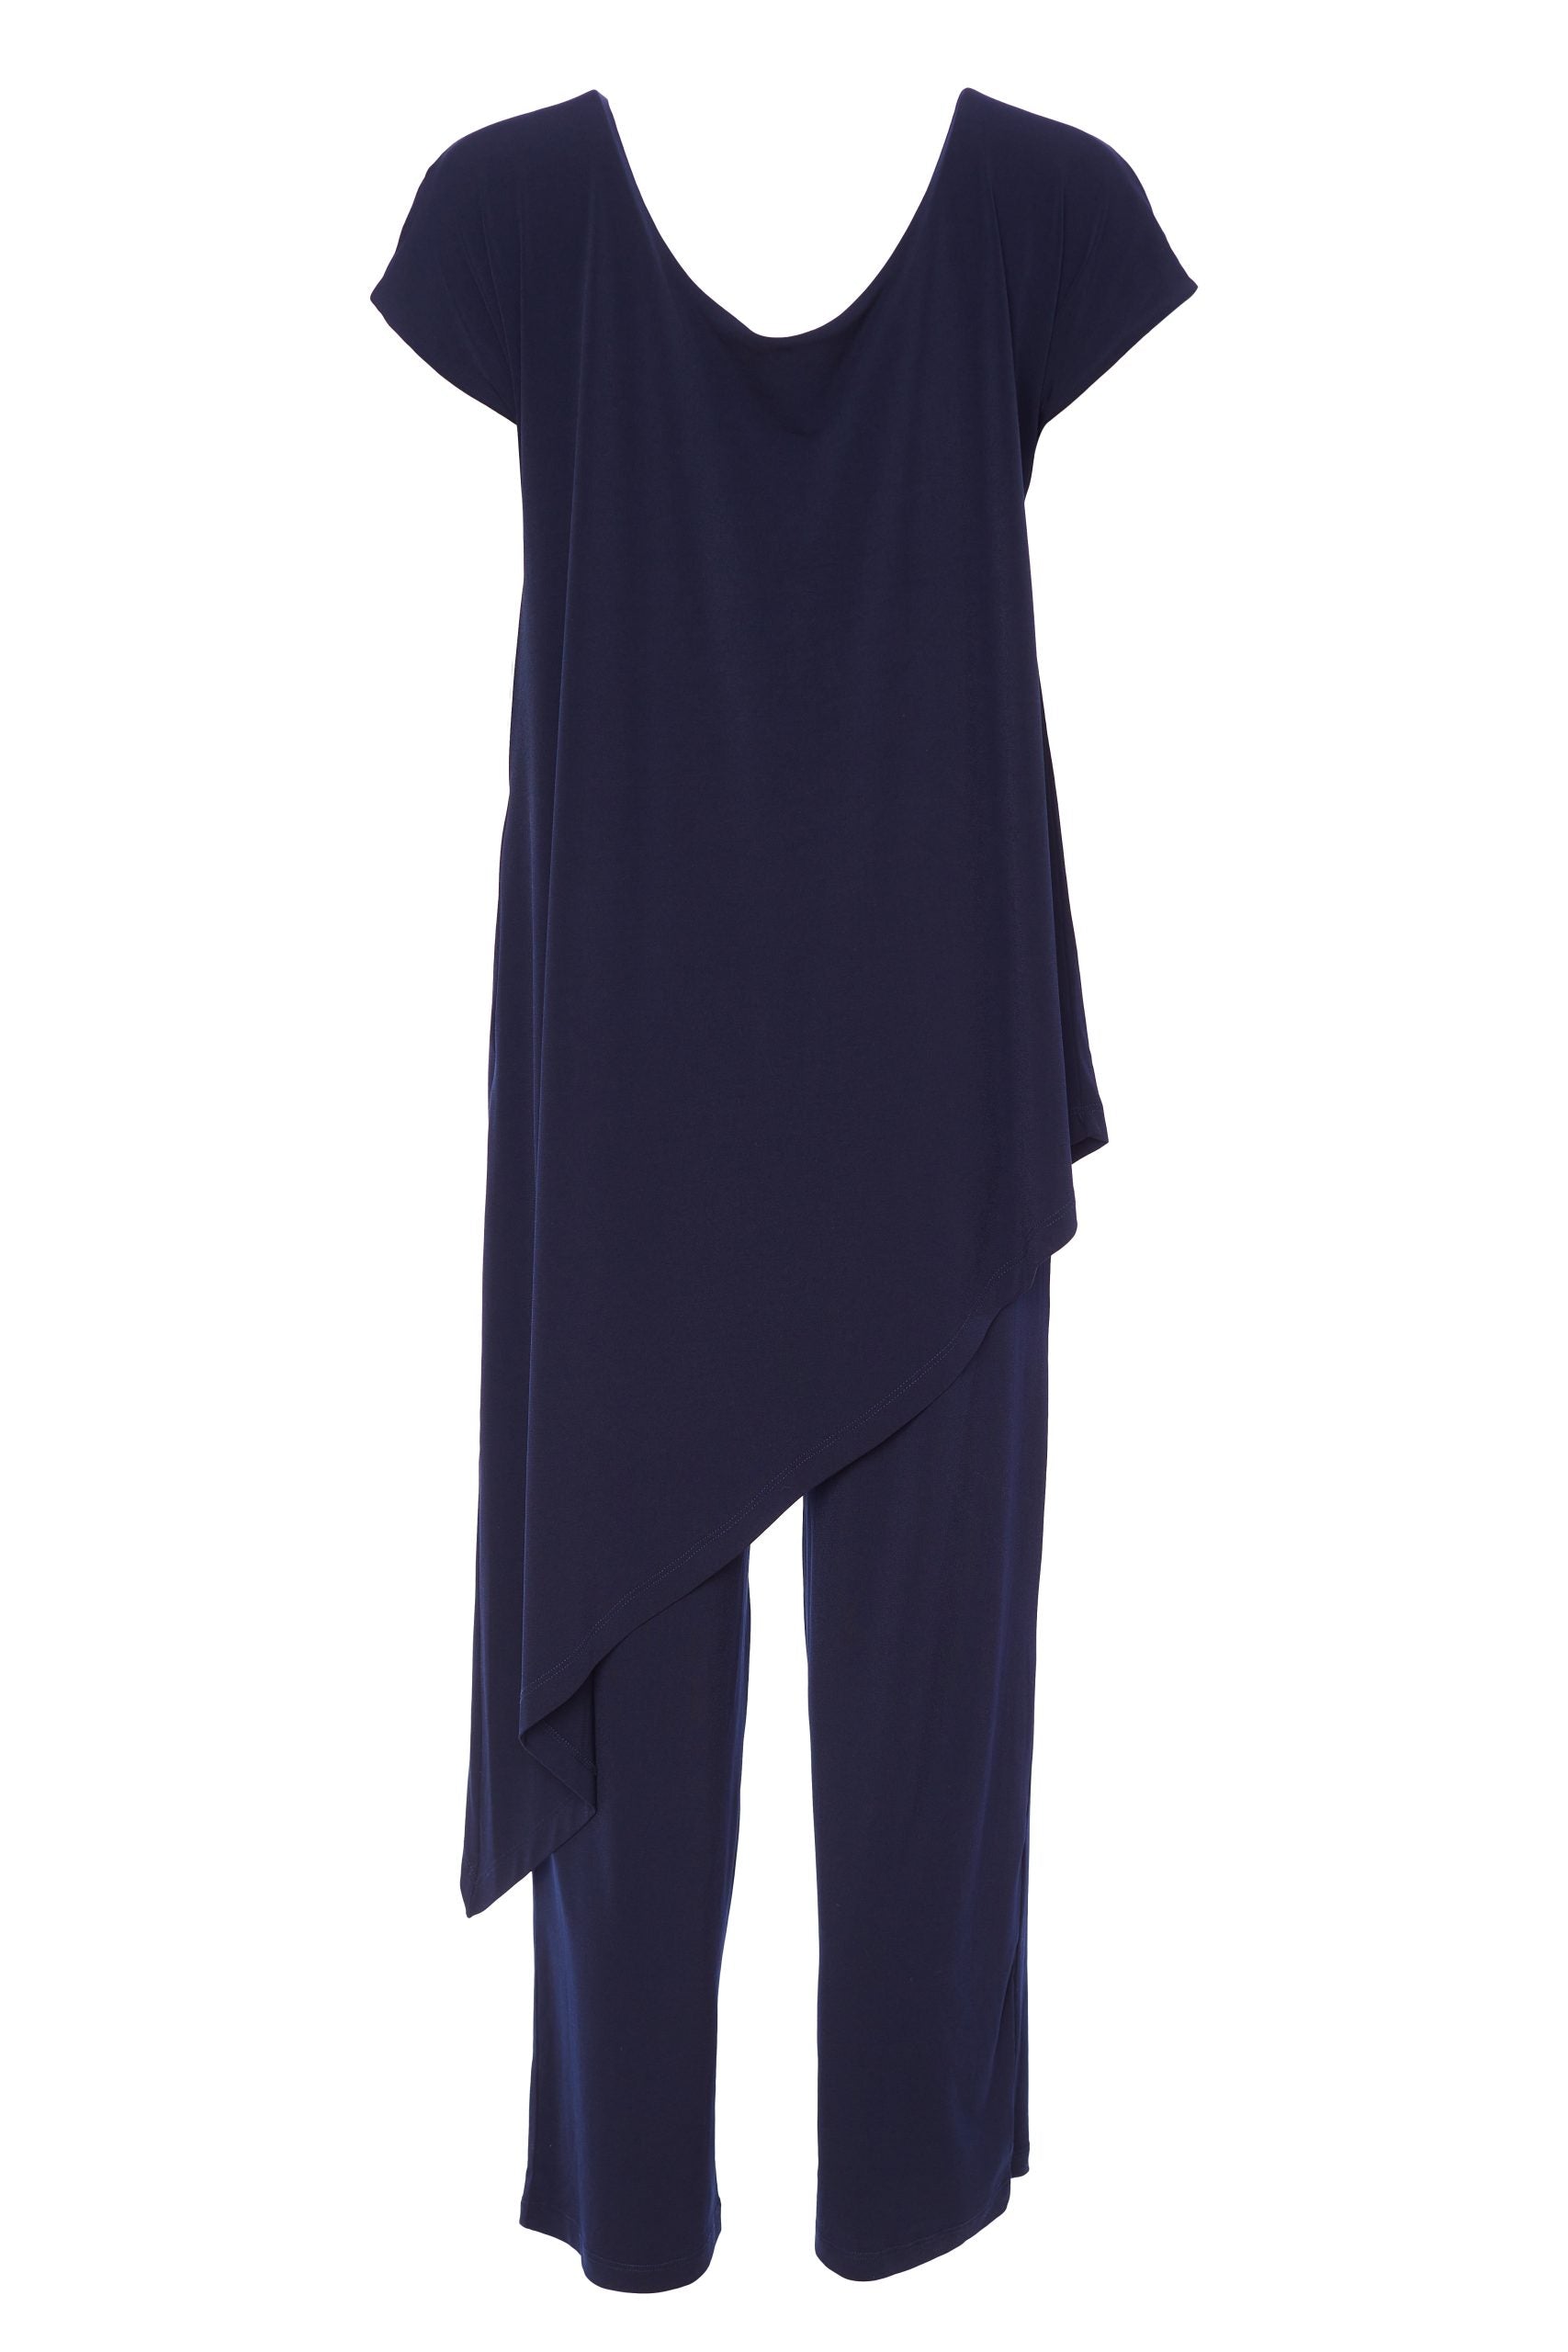 Naya - Over the Top Jumpsuit in Navy